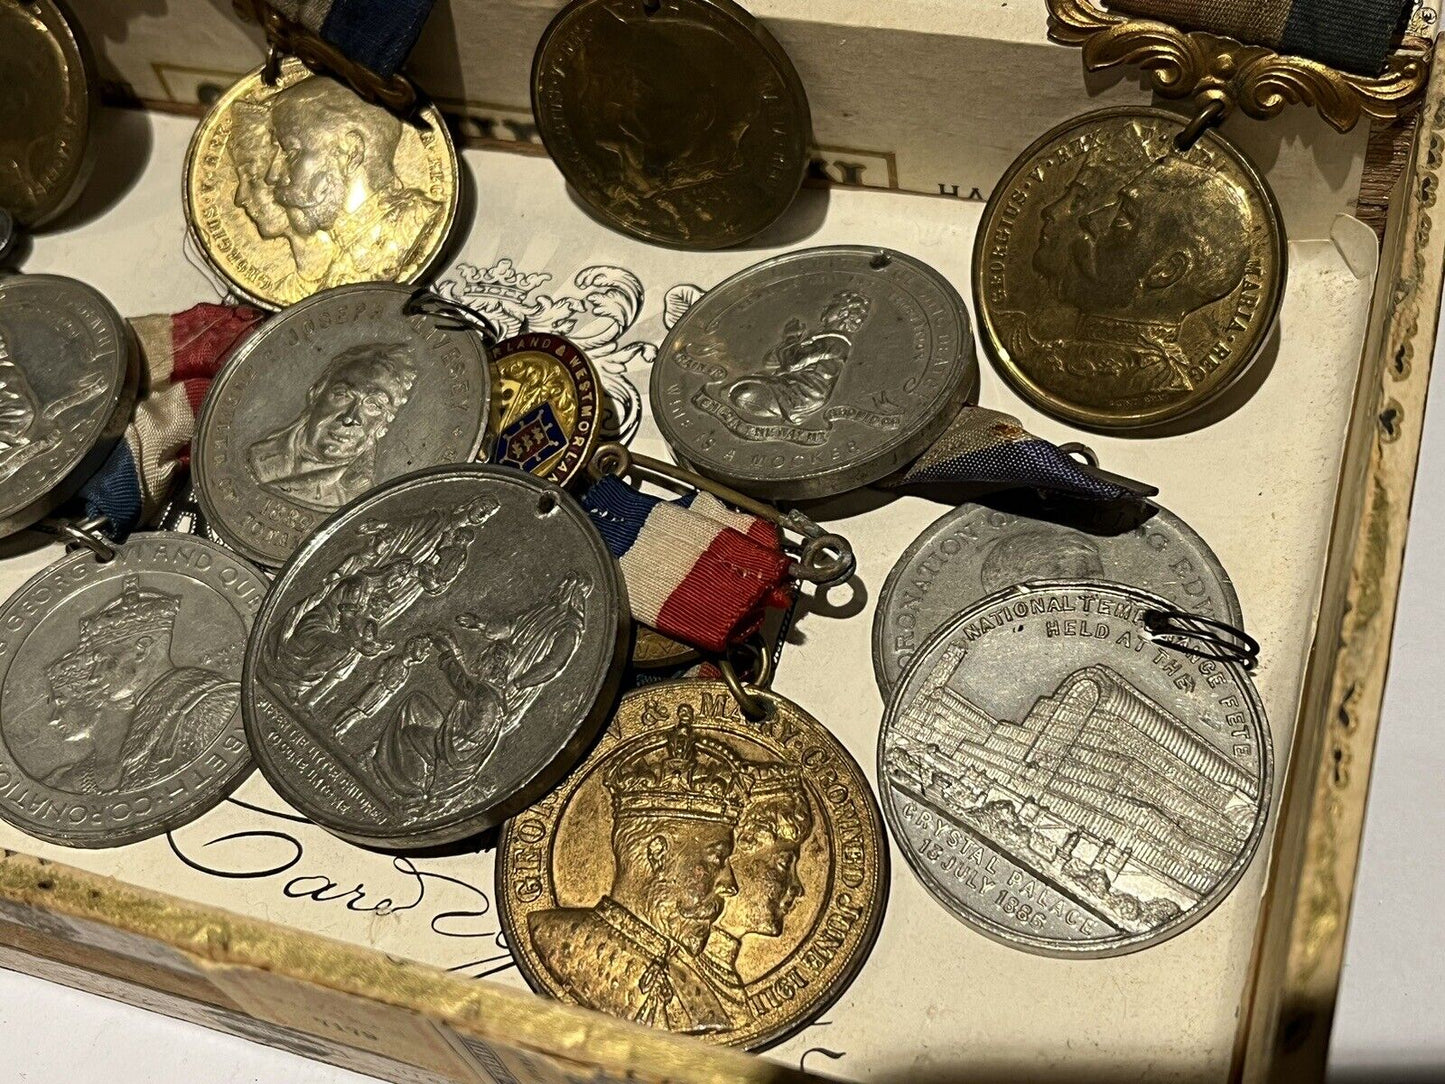 Old Badges. Mostly Bowls Awards And Club Badges